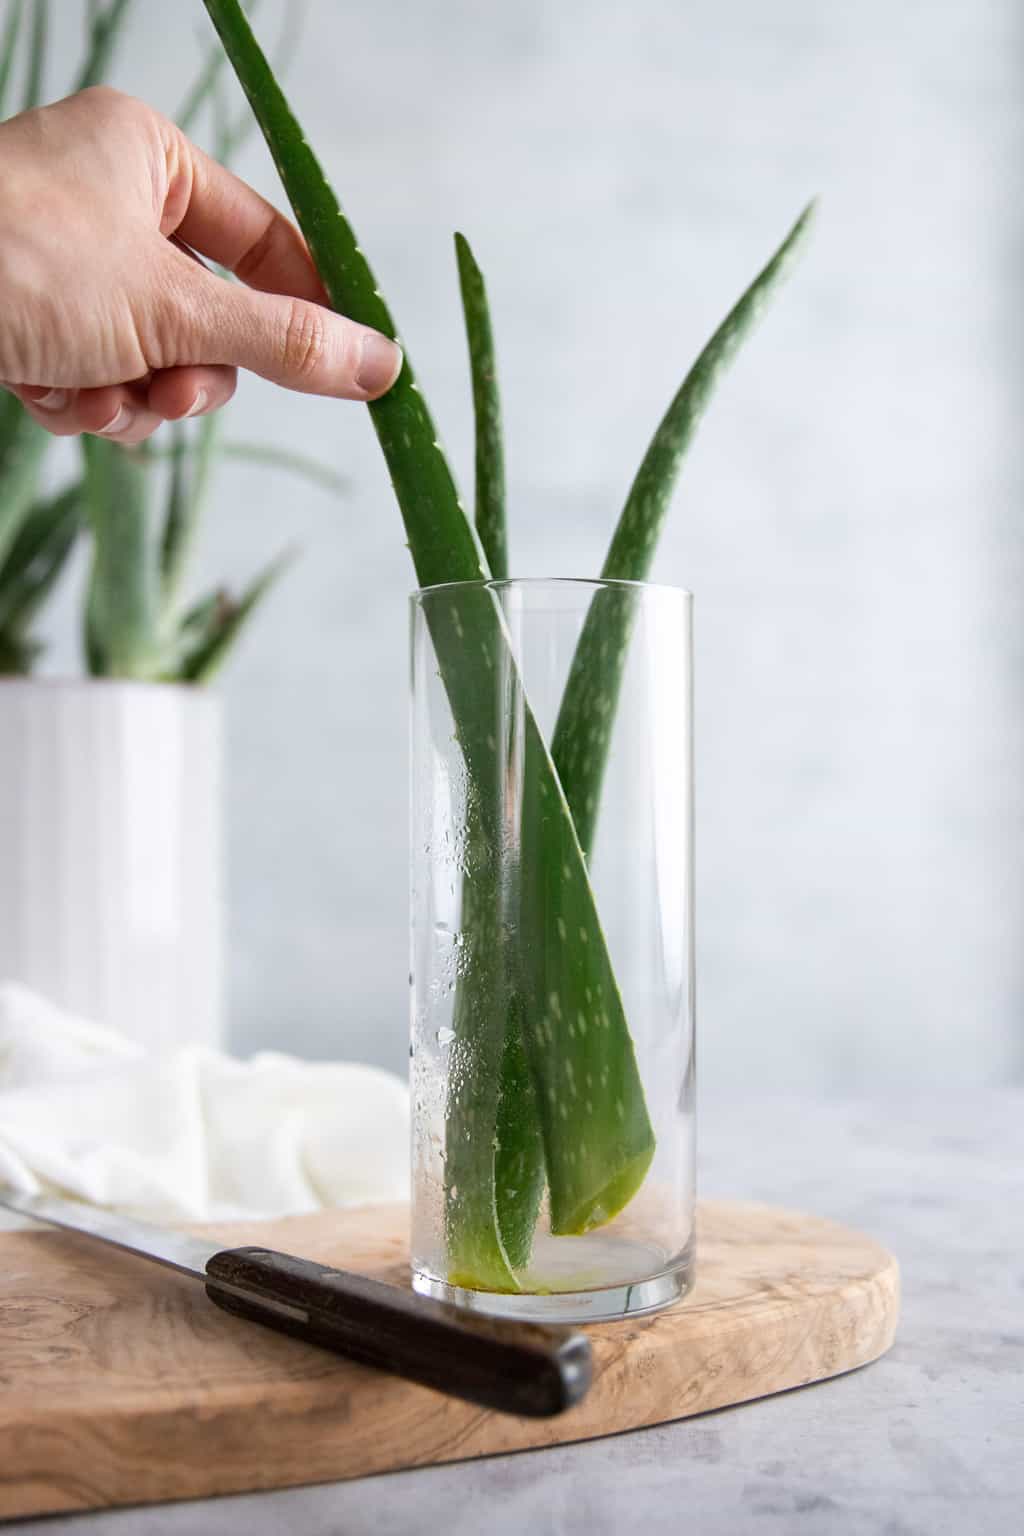 How to harvest and store fresh aloe vera gel